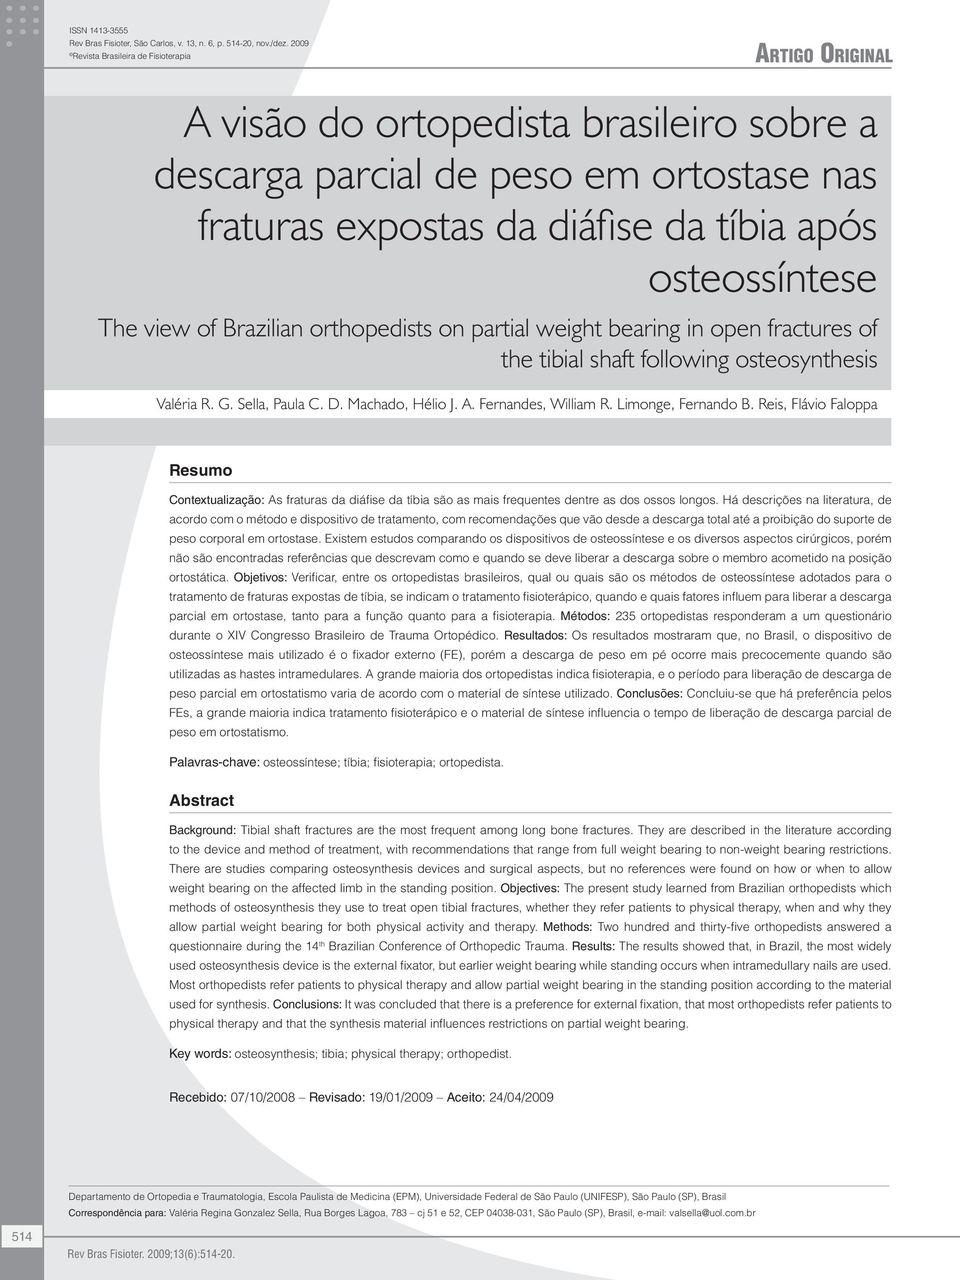 The view of Brazilian orthopedists on partial weight bearing in open fractures of the tibial shaft following osteosynthesis Valéria R. G. Sella, Paula C. D. Machado, Hélio J. A. Fernandes, William R.